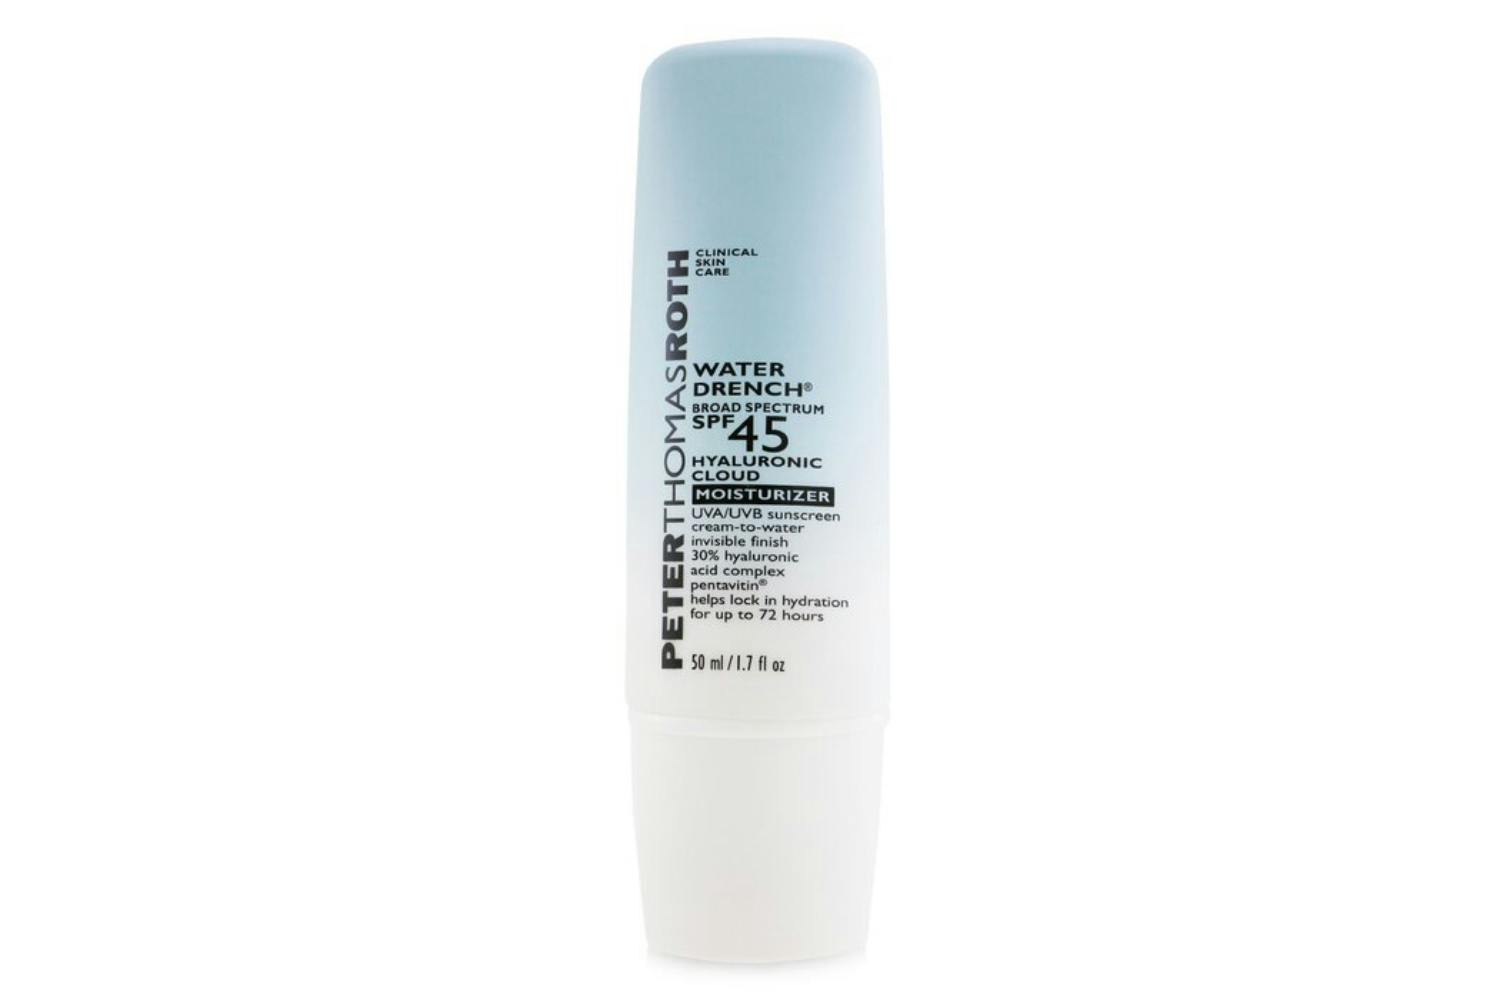 Peter Thomas Roth 252190 Water Drench Hyaluronic Cloud Moisturizer SPF 45 UVA/UVB Sunscreen | 50ml